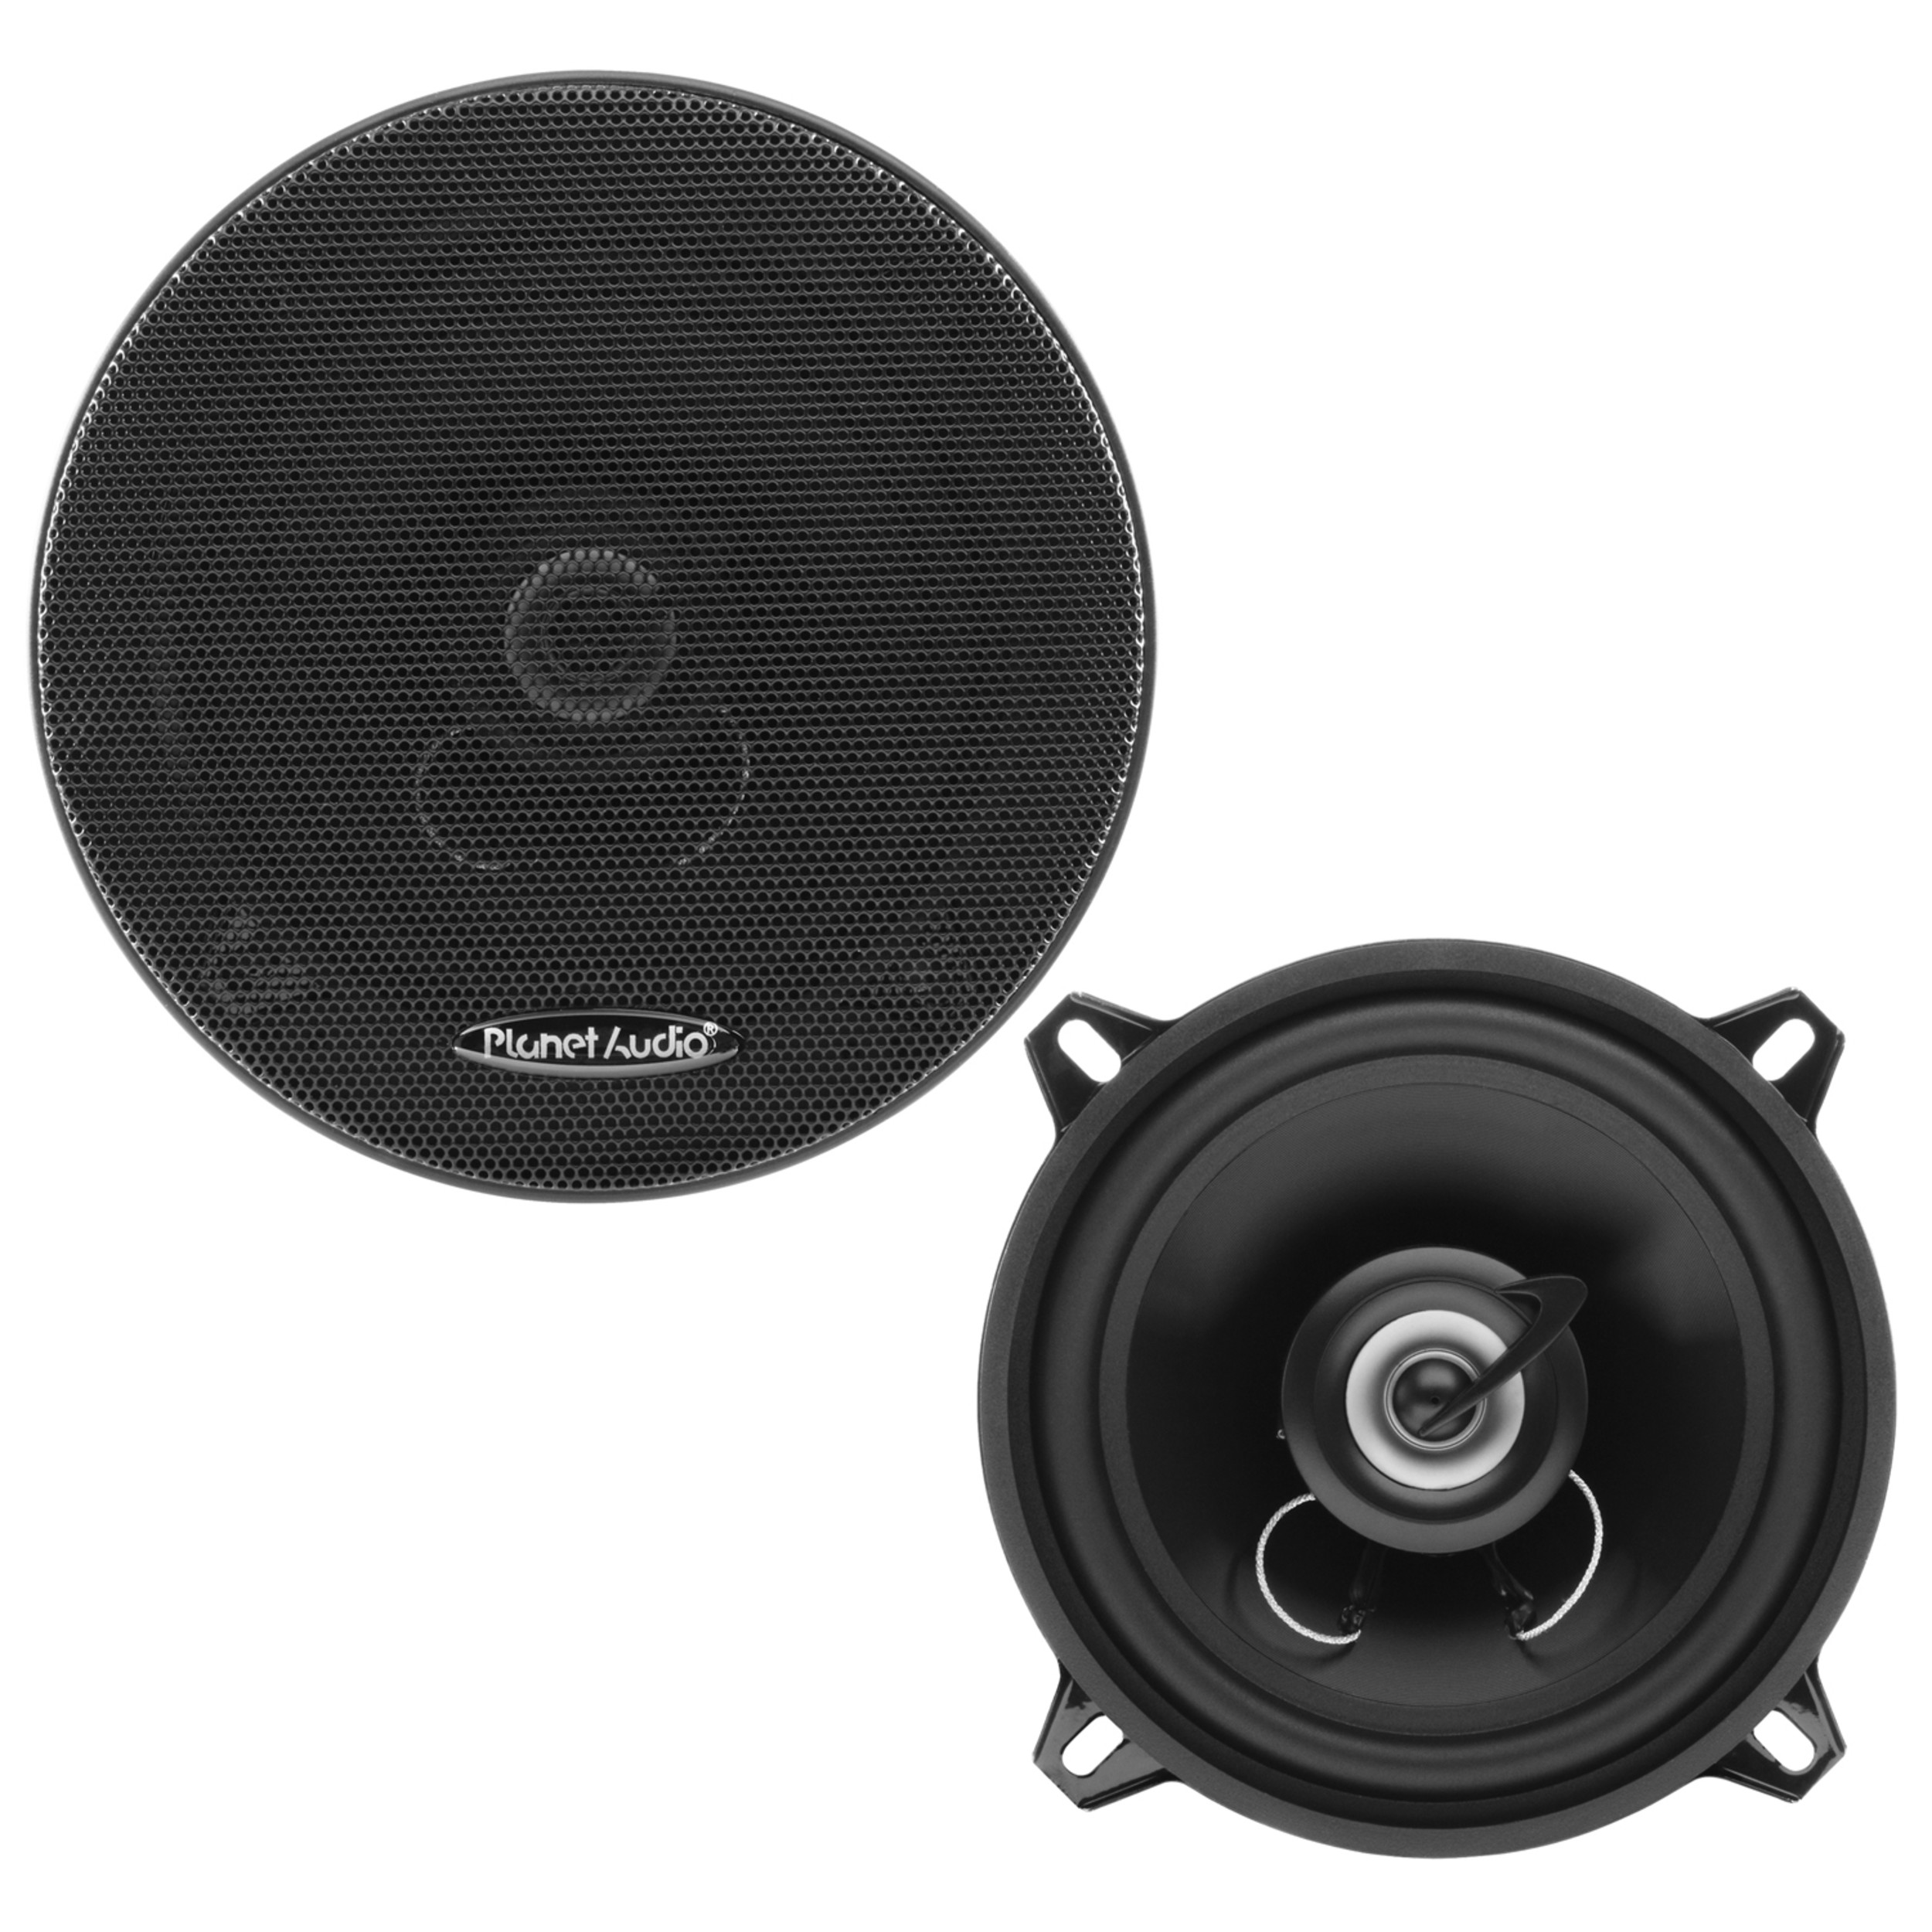 Planet Audio TRQ522 Torque Series 5.25 Inch Car Audio Door Speakers - 225 Watts Max, 2 Way, Full Range, Coaxial, Sold in Pairs, Hook Up To Stereo and Amplifier, Tweeters - image 1 of 9